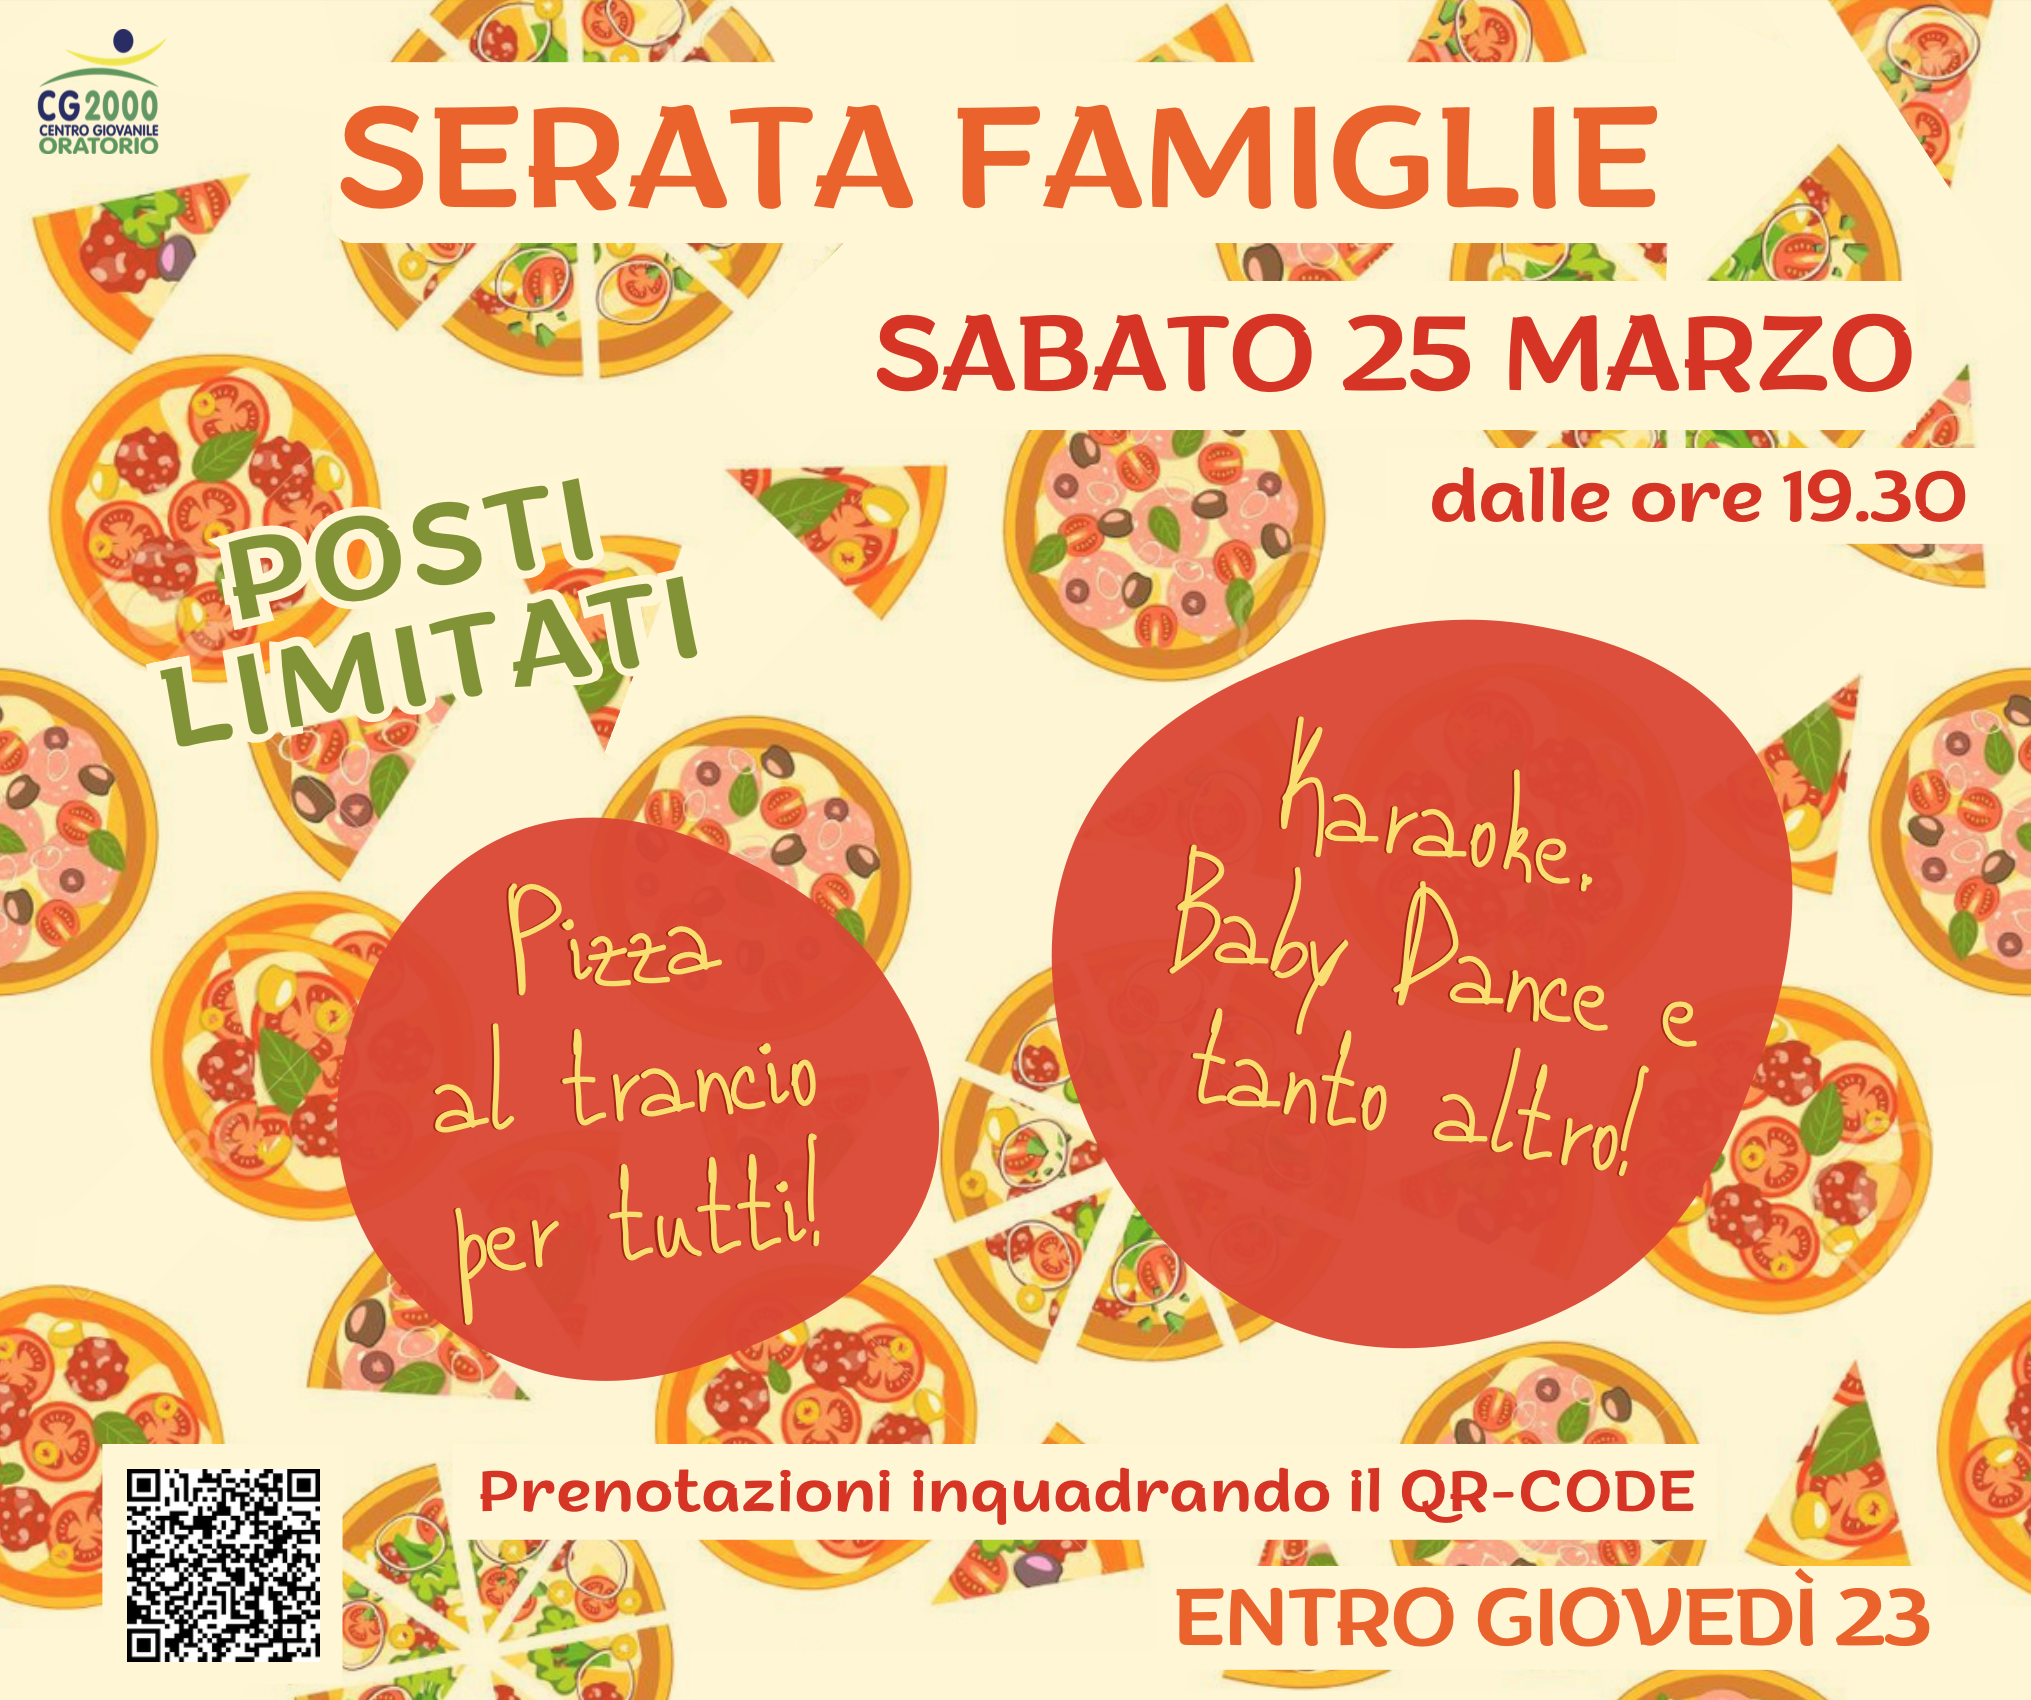 You are currently viewing SERATA FAMIGLIE – Sabato 25 Marzo